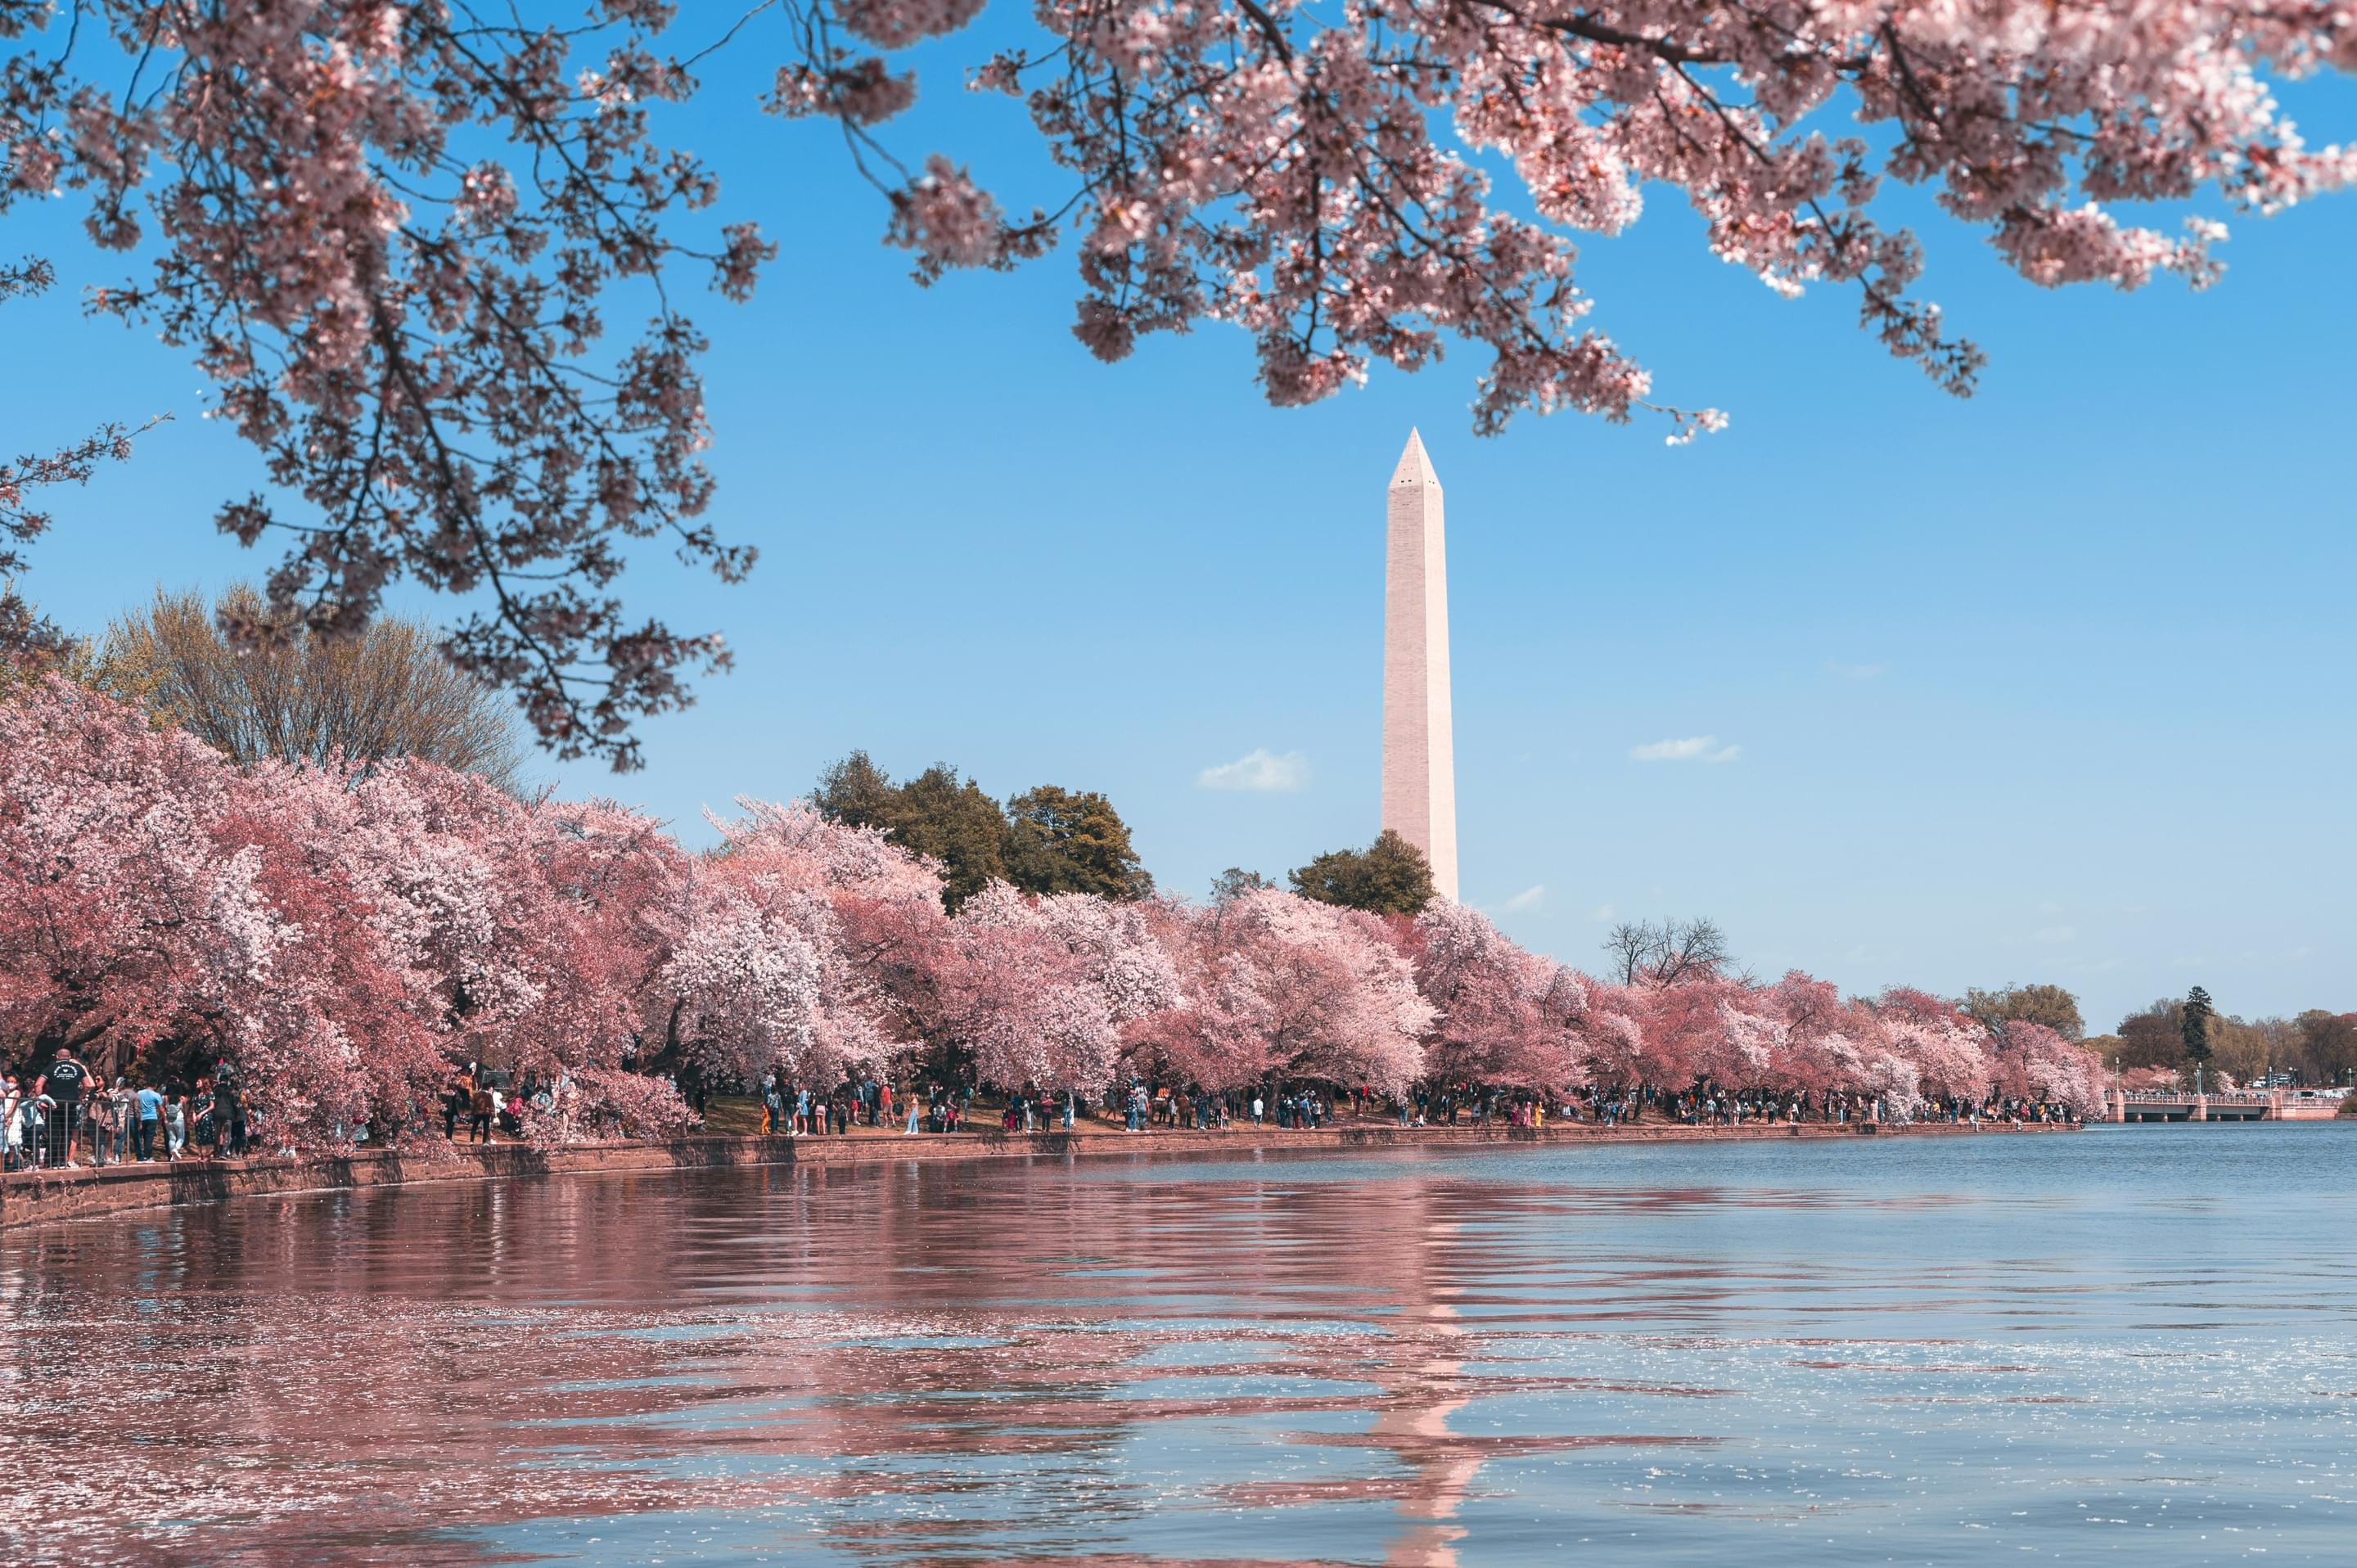 Things to Do in Washington D.C.